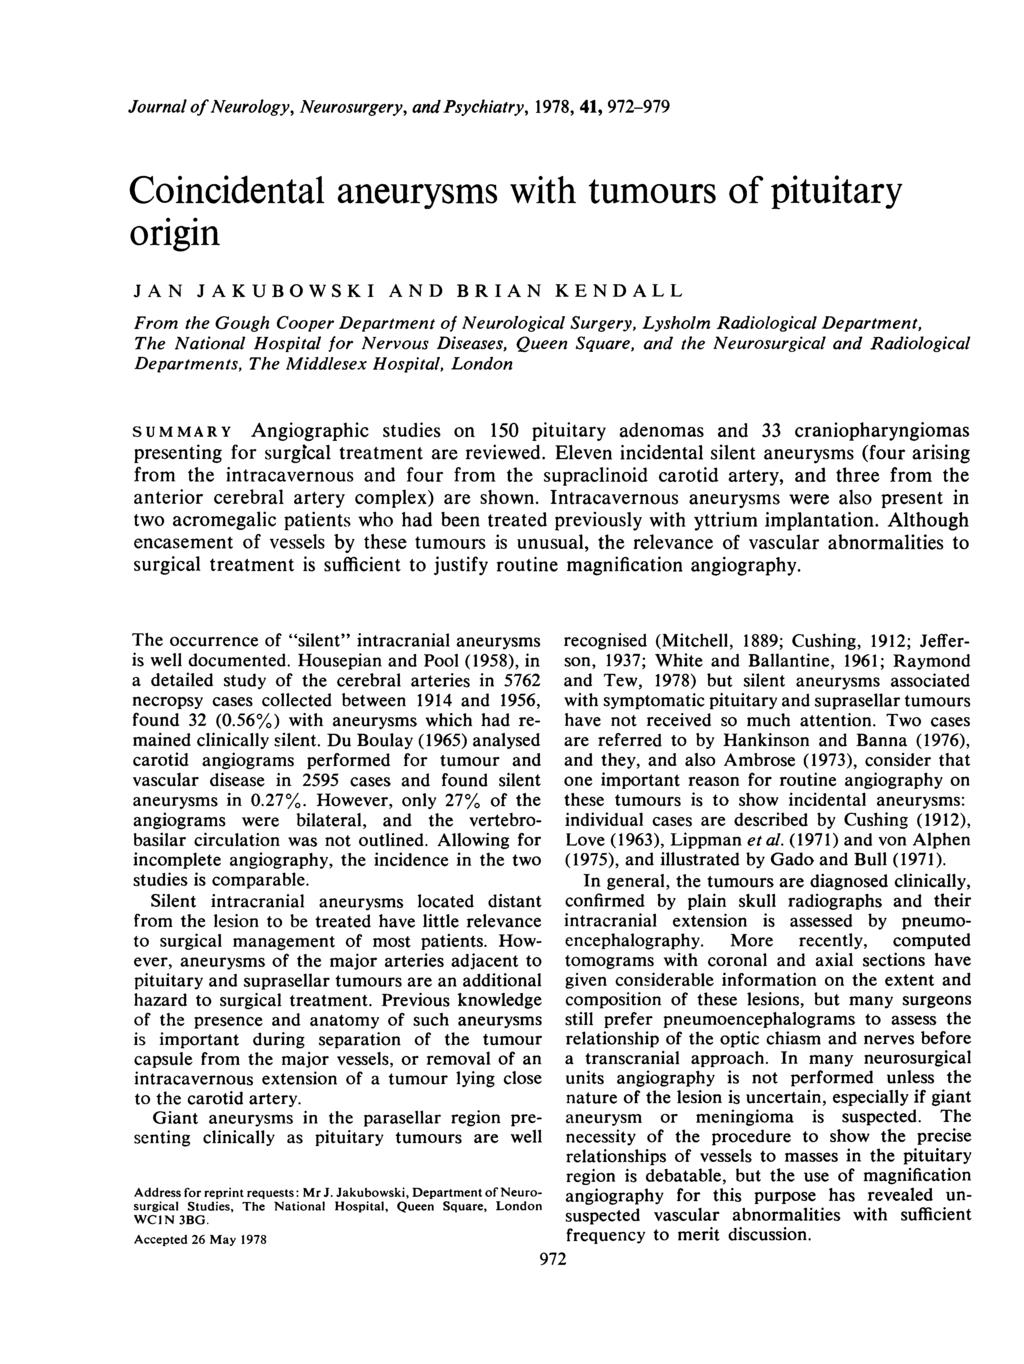 Journal ofneurology, Neurosurgery, and Psychiatry, 1978, 41, 972-979 Coincidental aneurysms with tumours of pituitary origin JAN JAKUBOWSKI AND BRIAN KENDALL From the Gough Cooper Department of